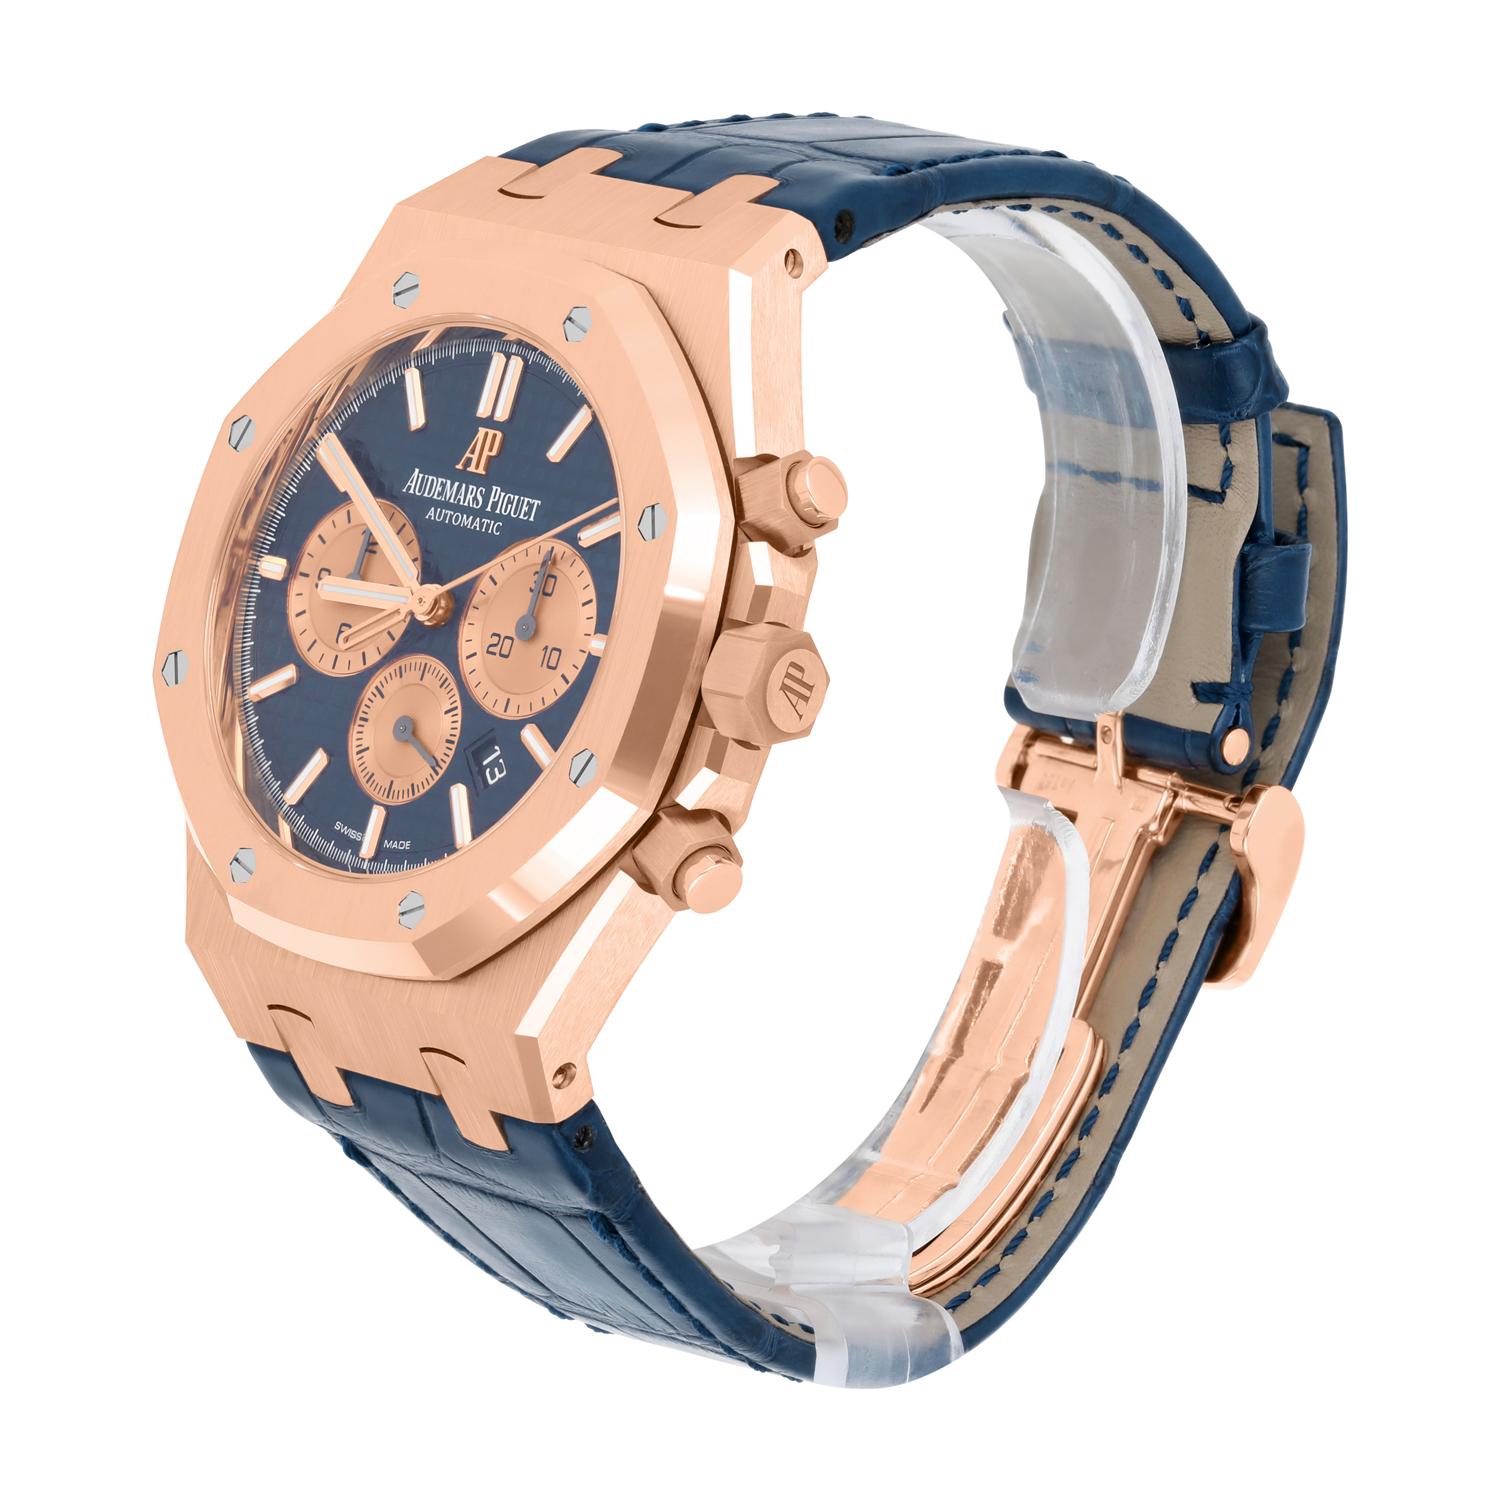 AP Royal Oak 41mm 18kt Rose Gold Blue Boutique Chronograph 26331OR.OO.D315CR.01 In New Condition For Sale In New York, NY